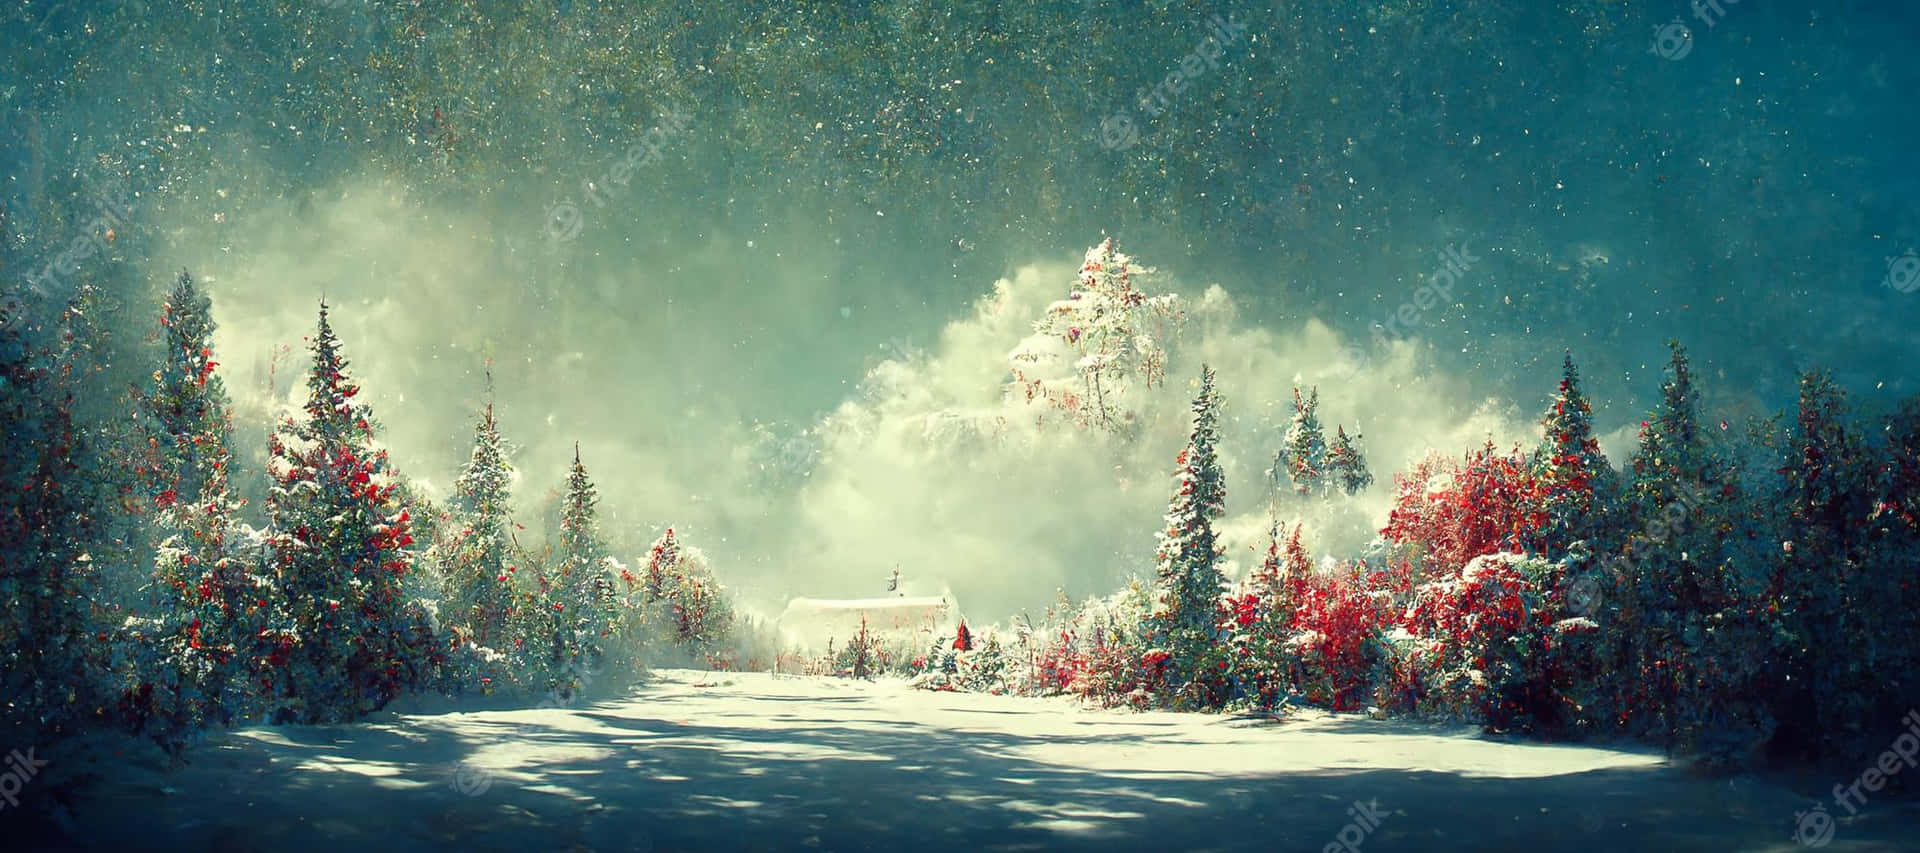 Celebrate the holiday season with a snowy Christmas Wallpaper